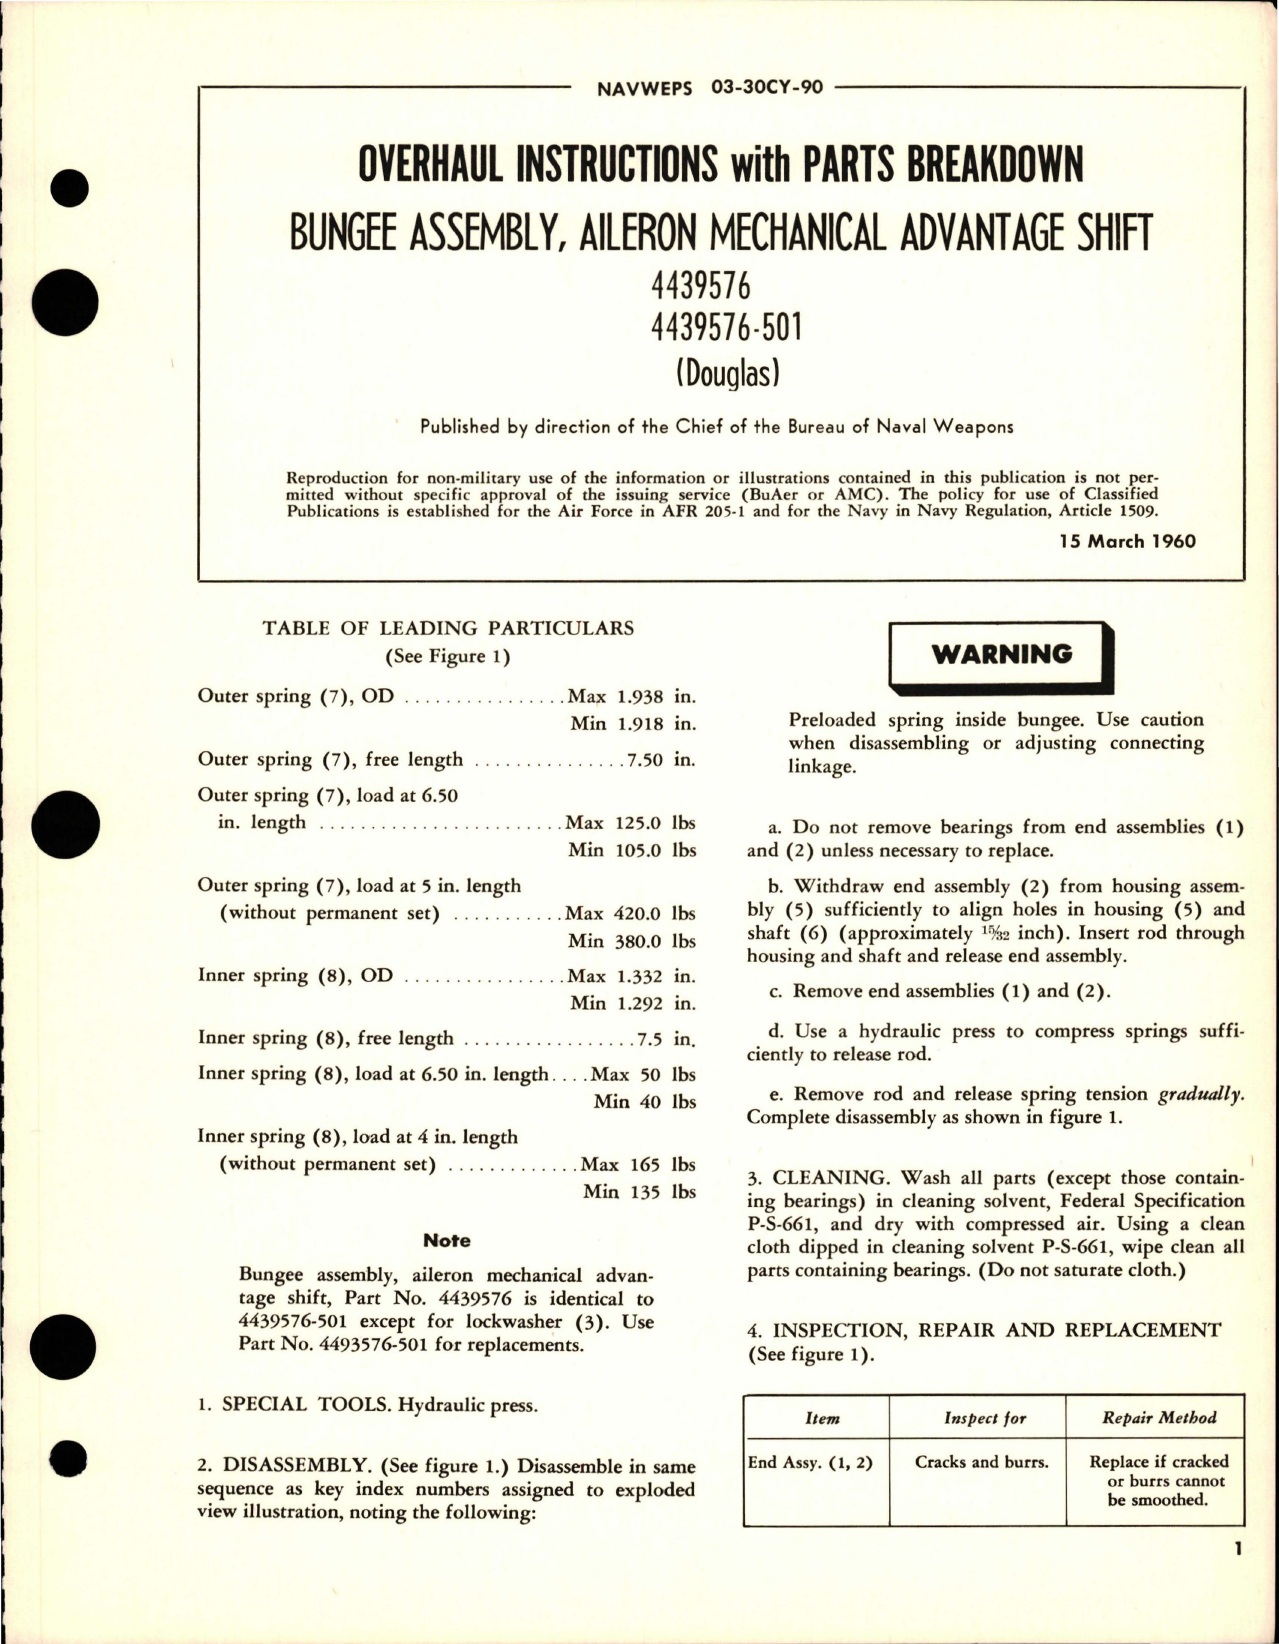 Sample page 1 from AirCorps Library document: Overhaul Instructions with Parts for Aileron Mechanical Advantage Shift Bungee Assembly - 4539576, 4439576-501